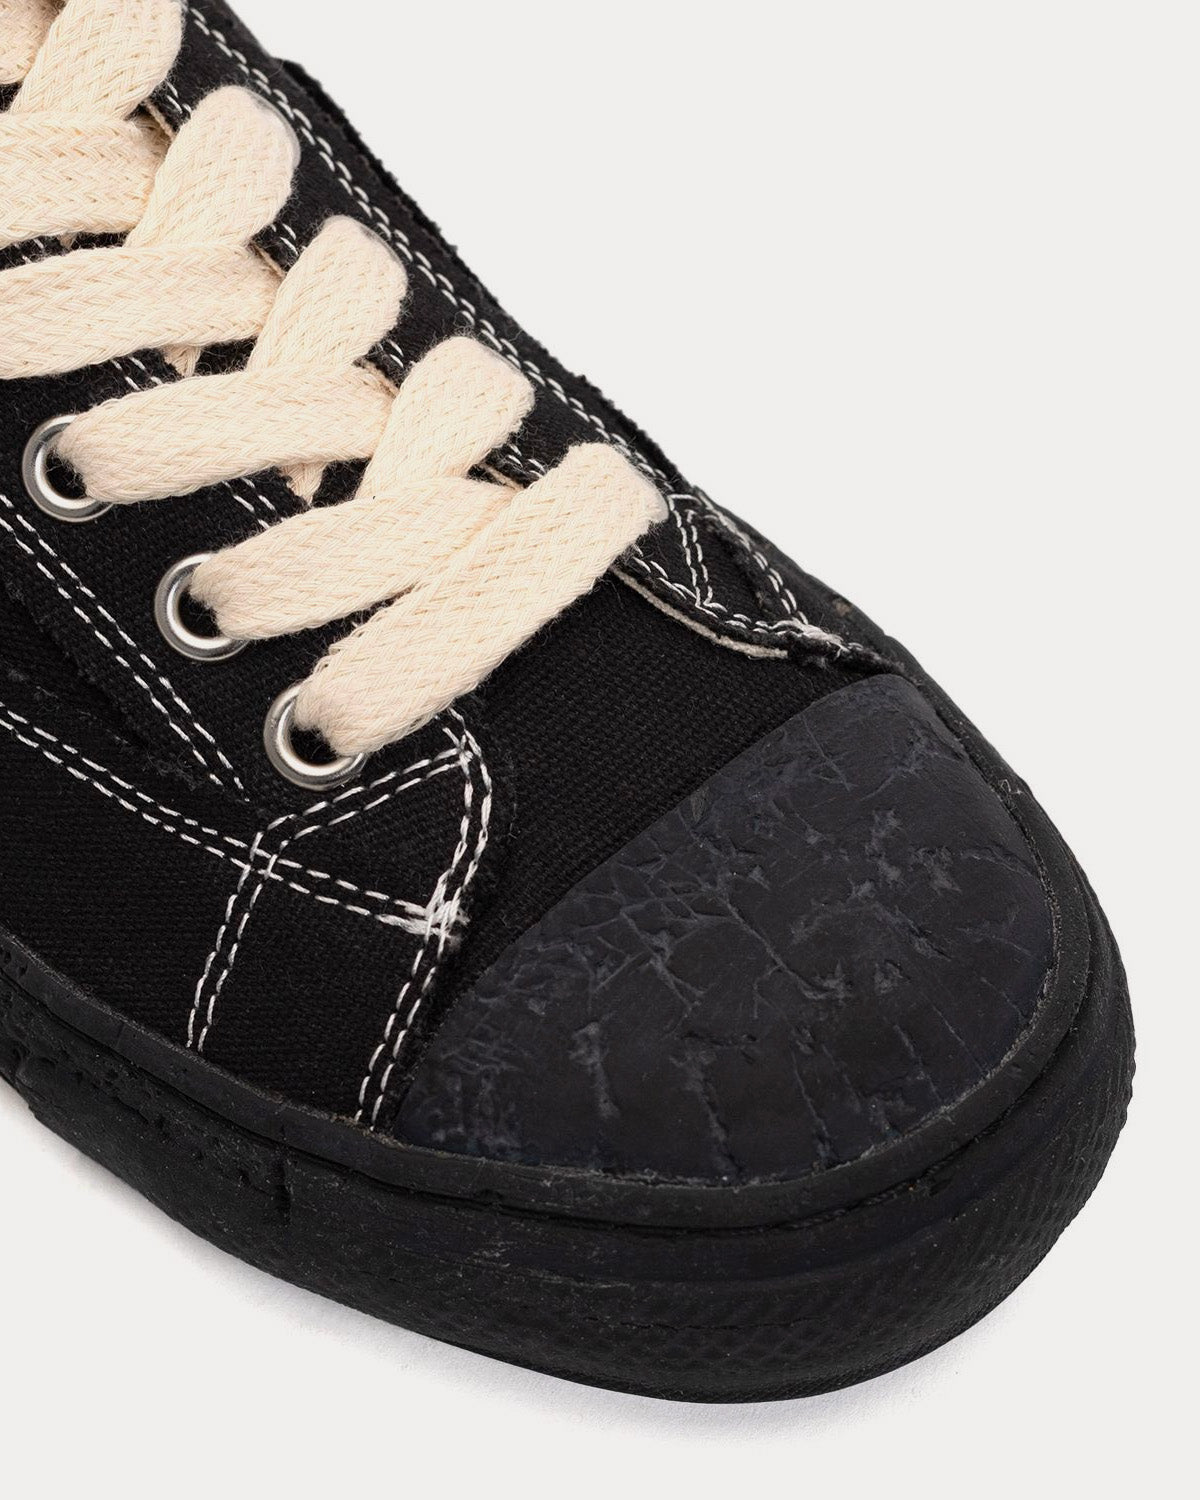 General Scale By Maison Mihara Yasuhiro - Past Sole Canvas Black / Black High Top Sneakers